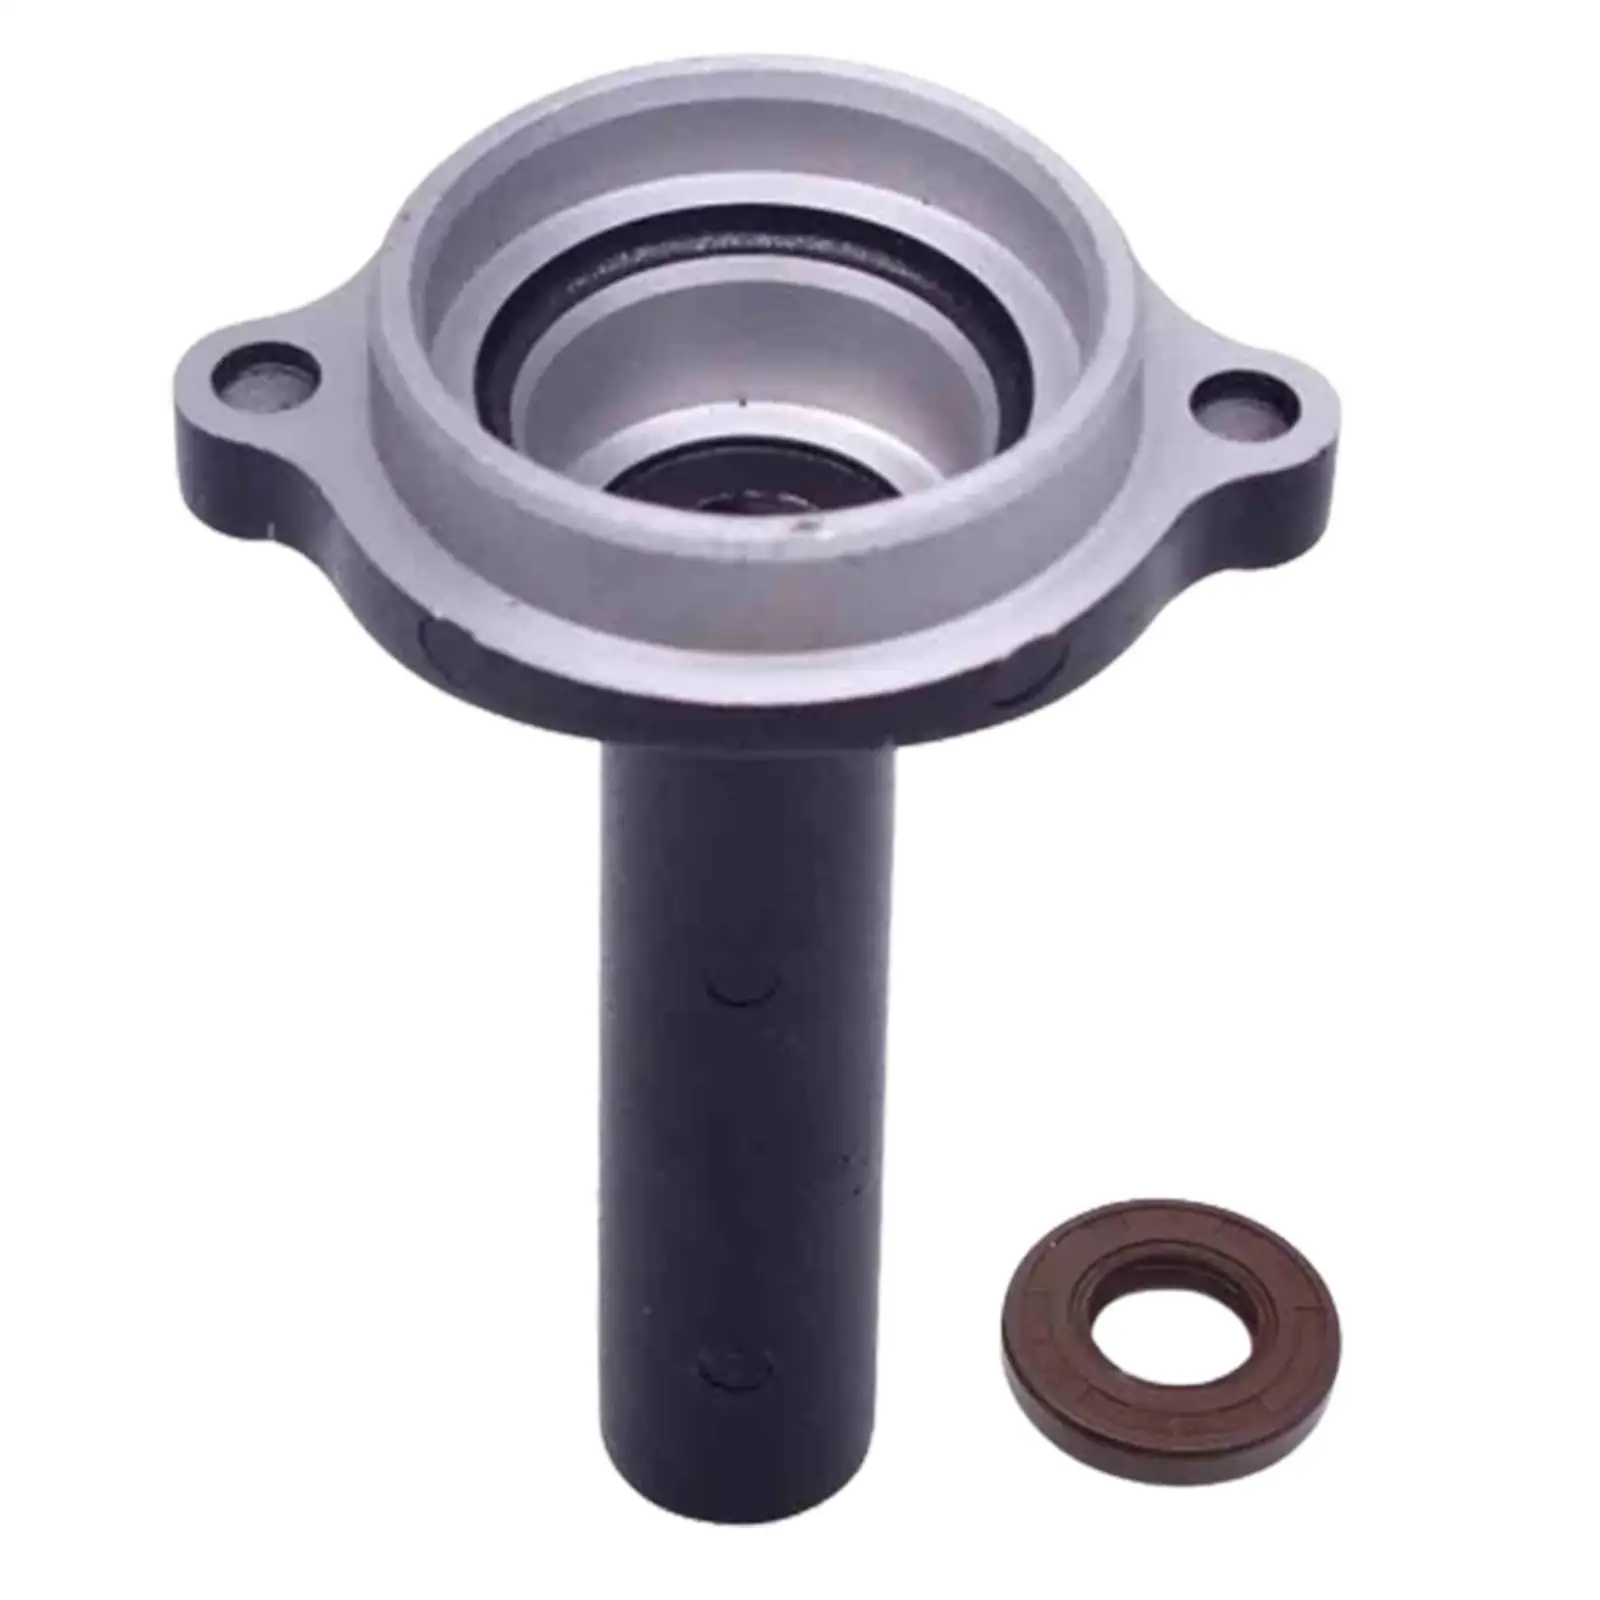 3B2-01210 Easy Installation Assembly Repair Parts Oil Seal Accessories replace for Tohatsu Nissan Outboard 8HP 9.8HP 2T